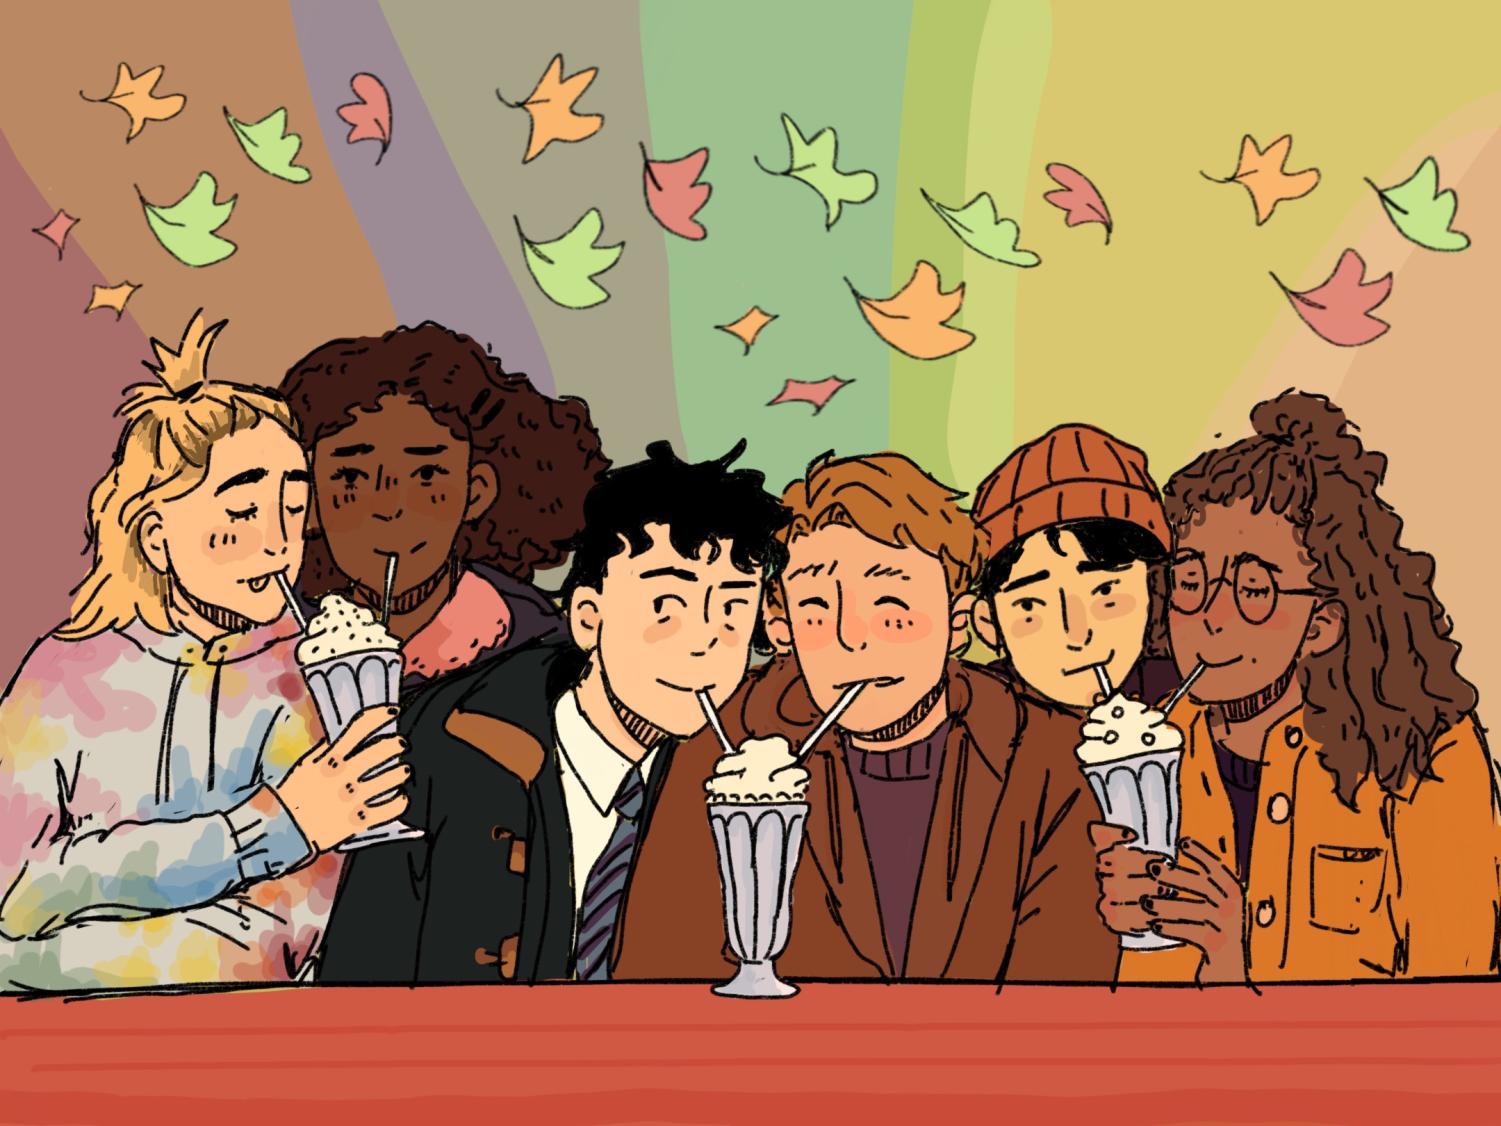 Heartstopper: A Step Forward for LGBTQ+ Representation in the